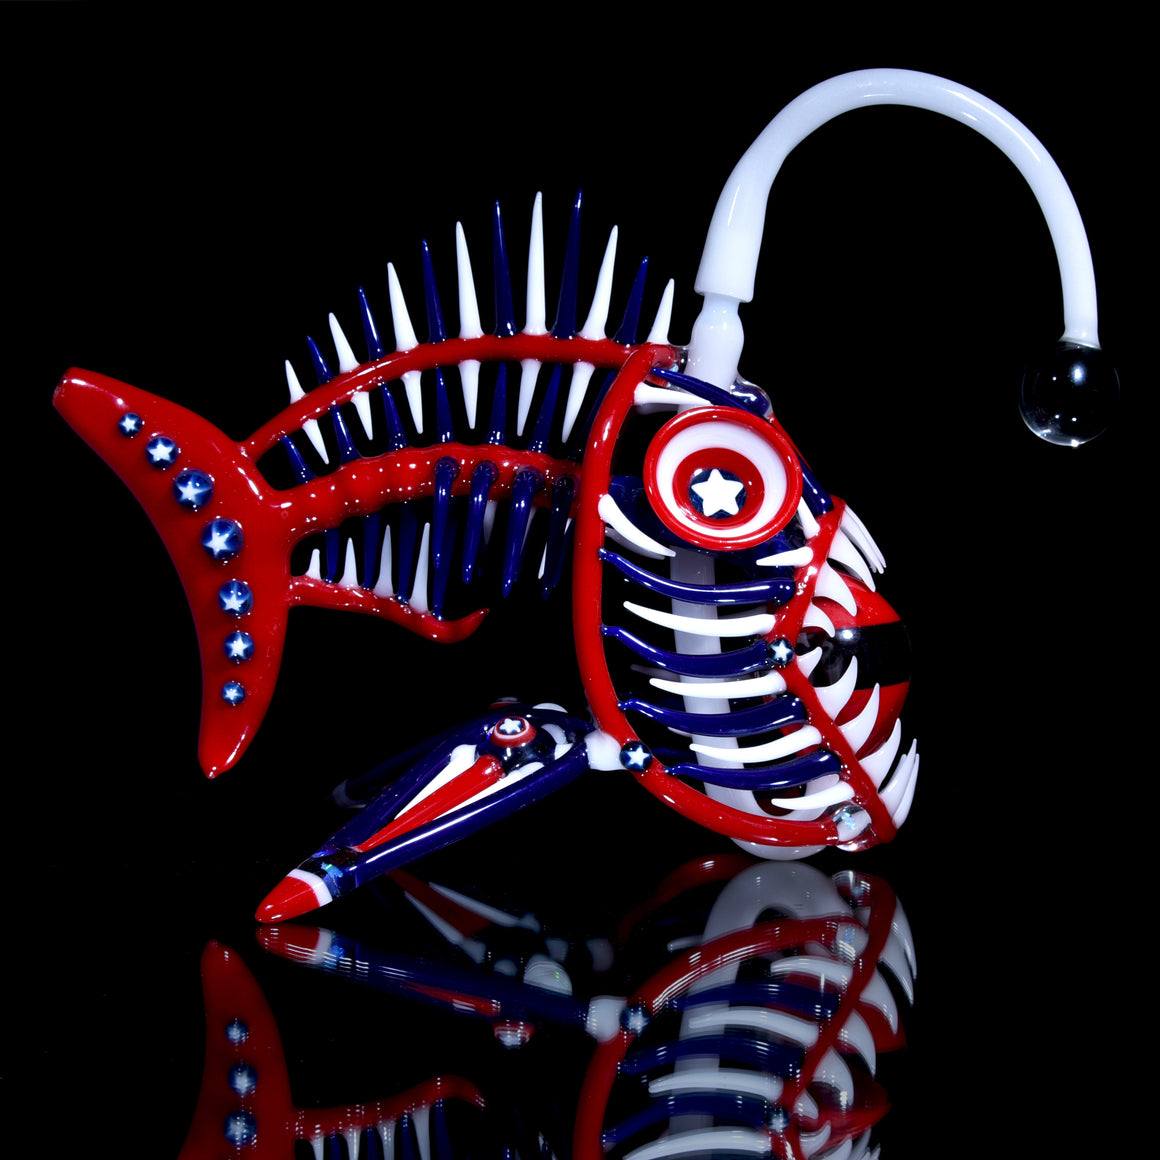 "Stars, Stripes, and Spikes" - 2014 Full-size Angler Fish